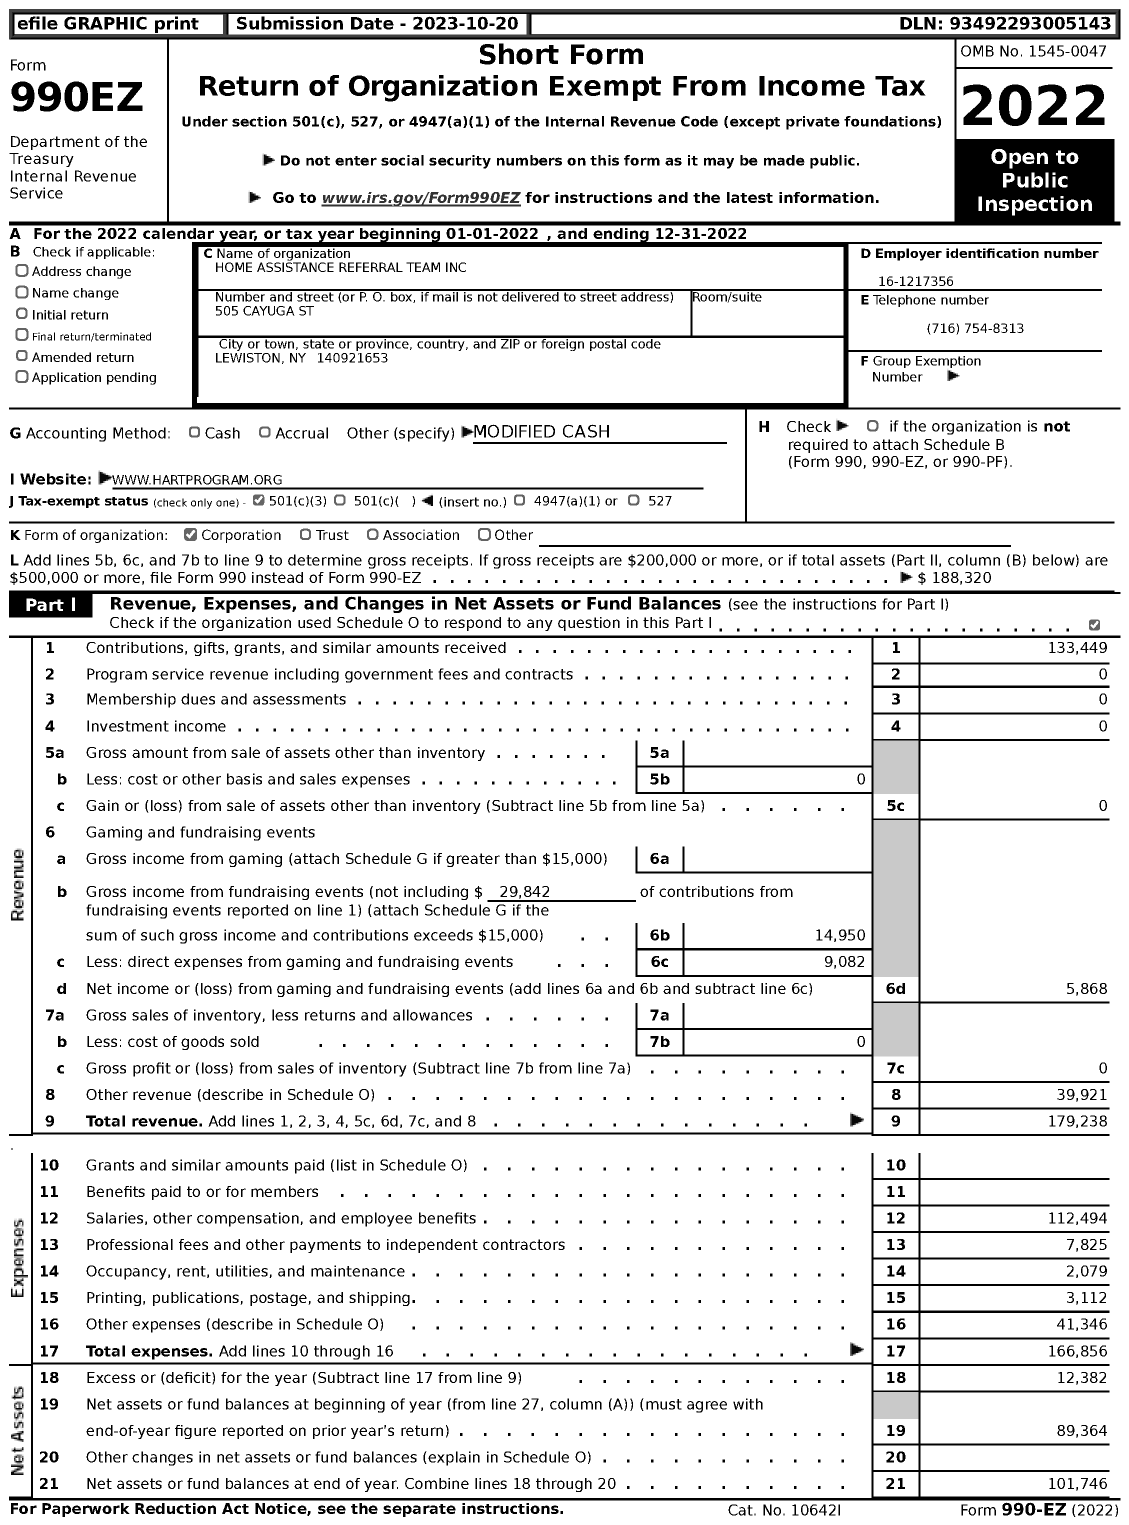 Image of first page of 2022 Form 990EZ for Home Assistance Referral Team